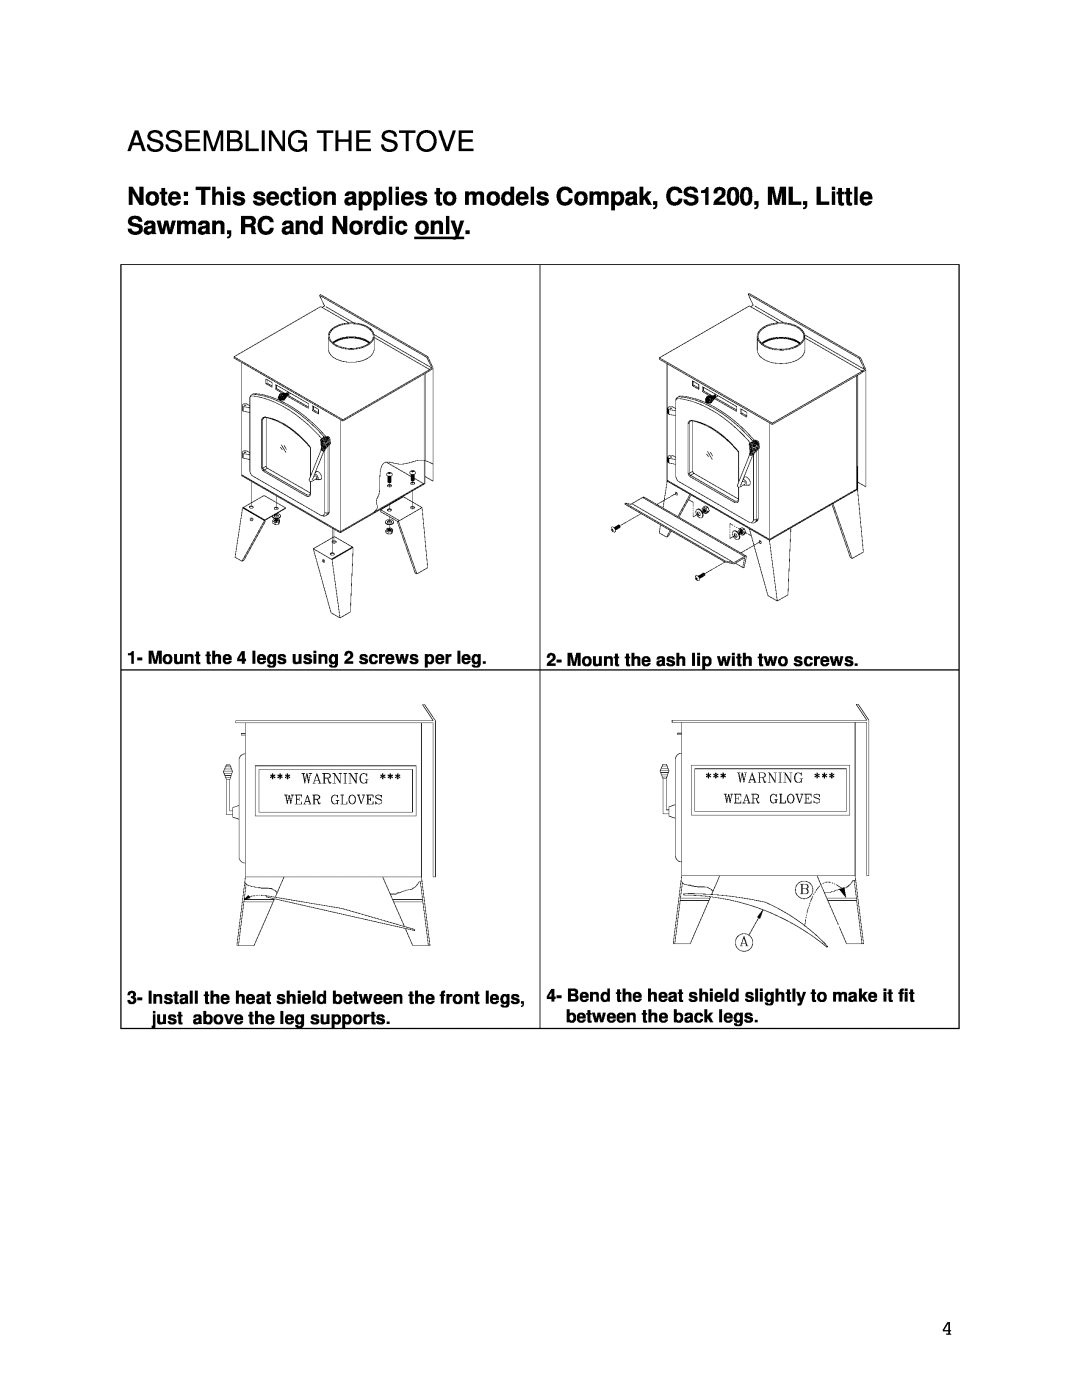 Drolet CS1200 manual Assembling The Stove, Mount the 4 legs using 2 screws per leg, Mount the ash lip with two screws 